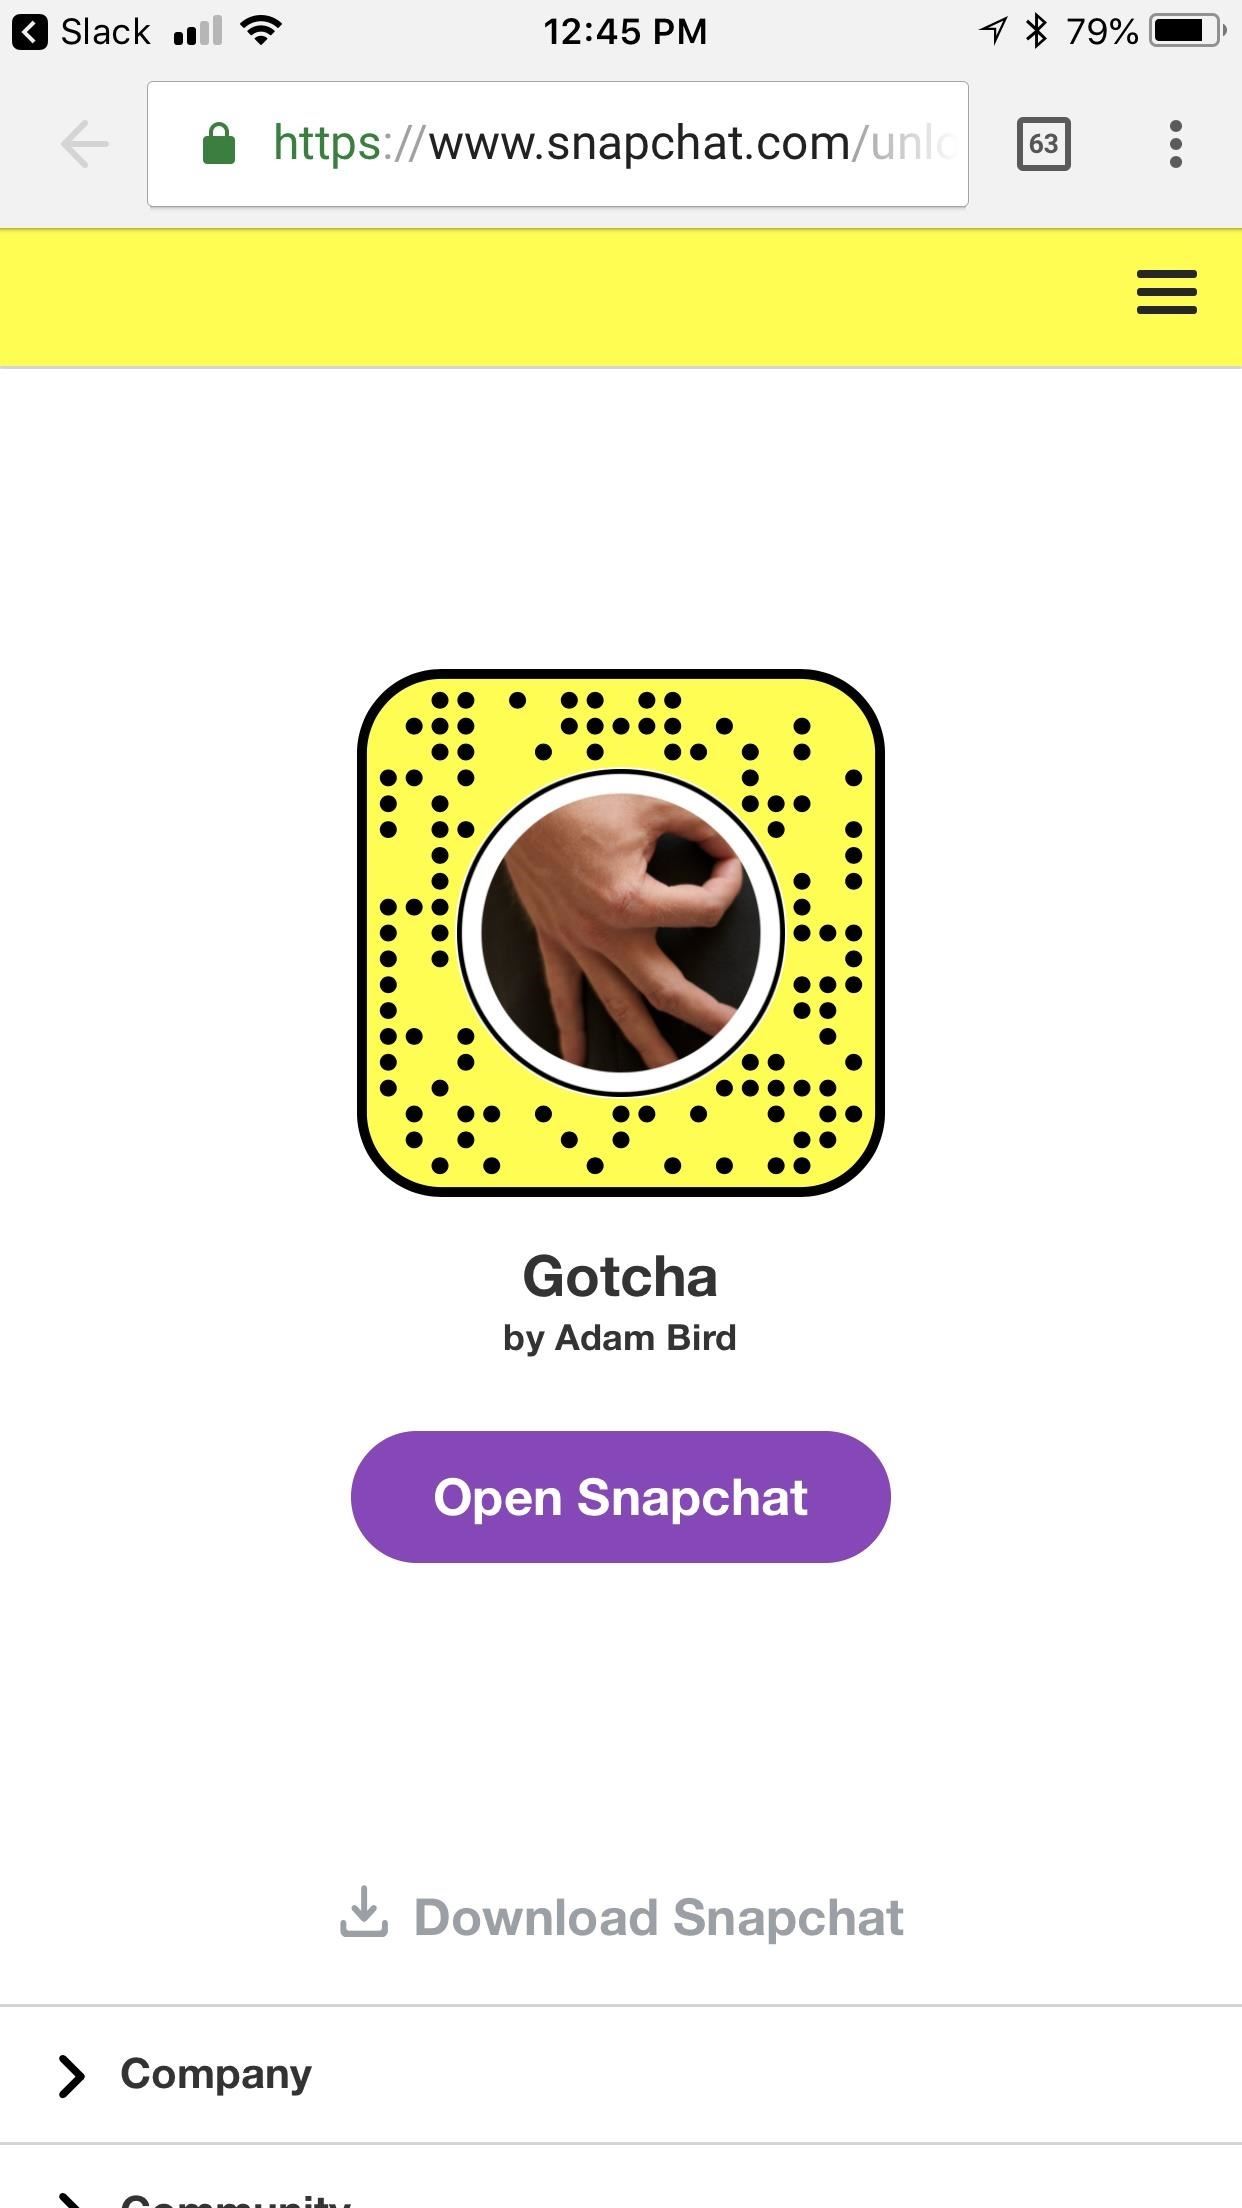 Try These 5 Hot New Snapchat Lenses — Fortnite Victory, Apyr & More